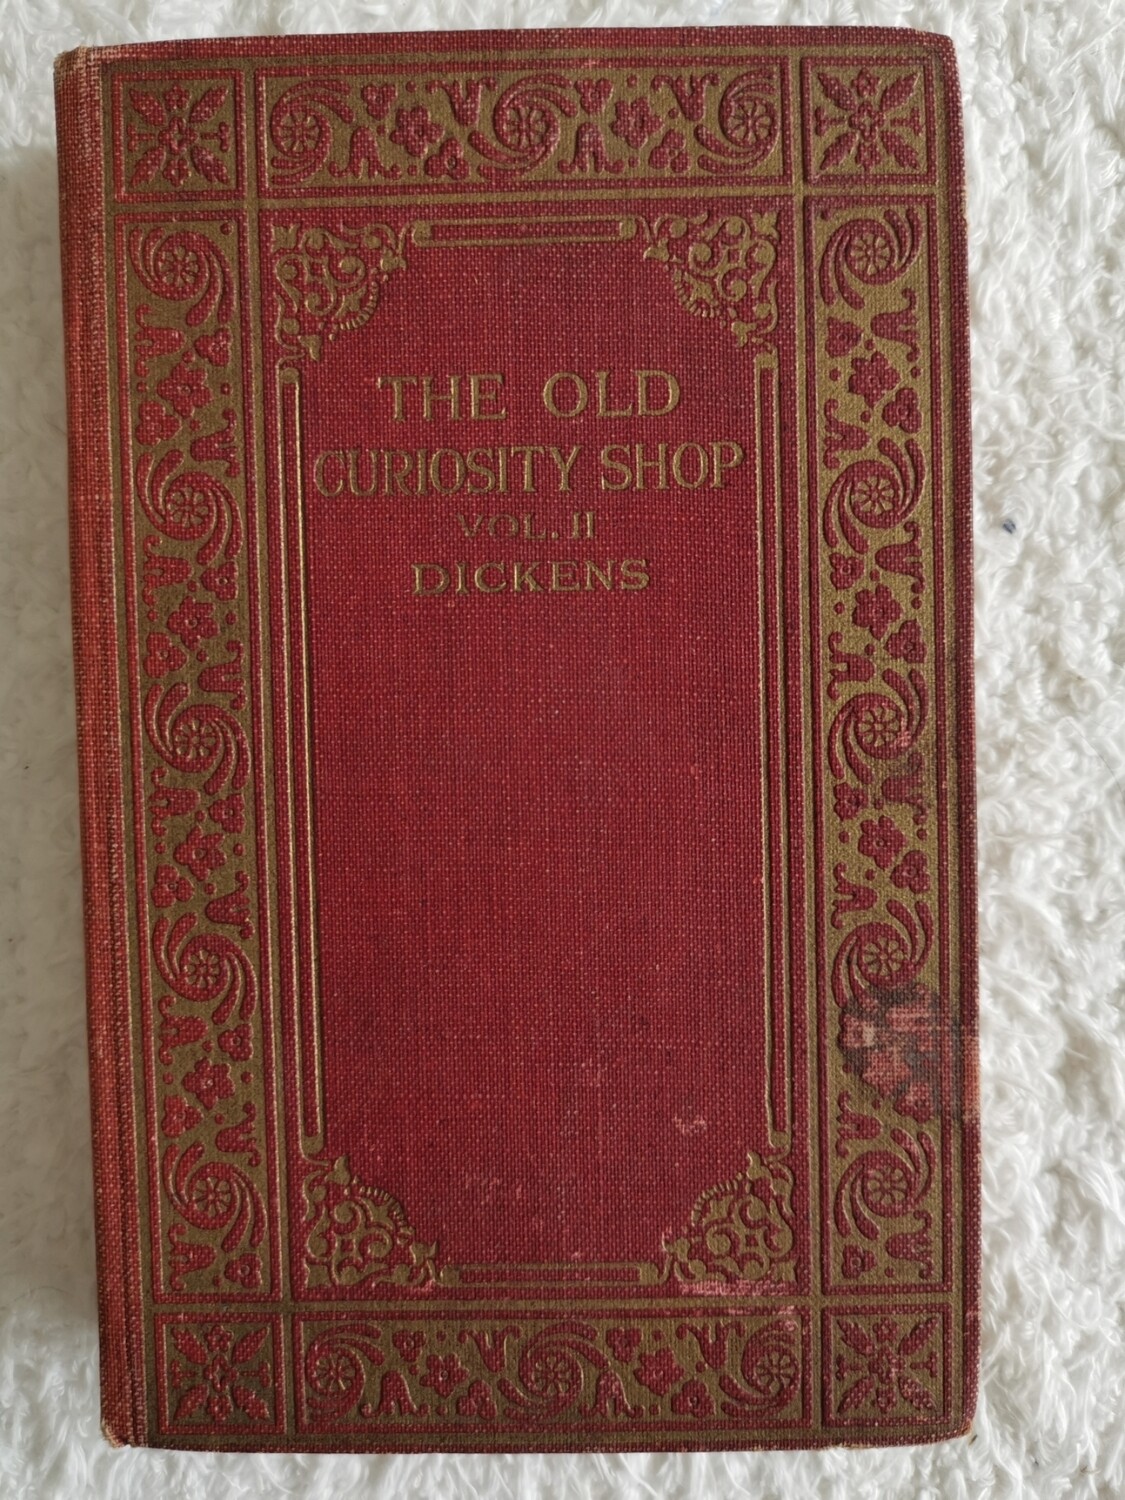 The Old curiosity shop, Charles Dickens